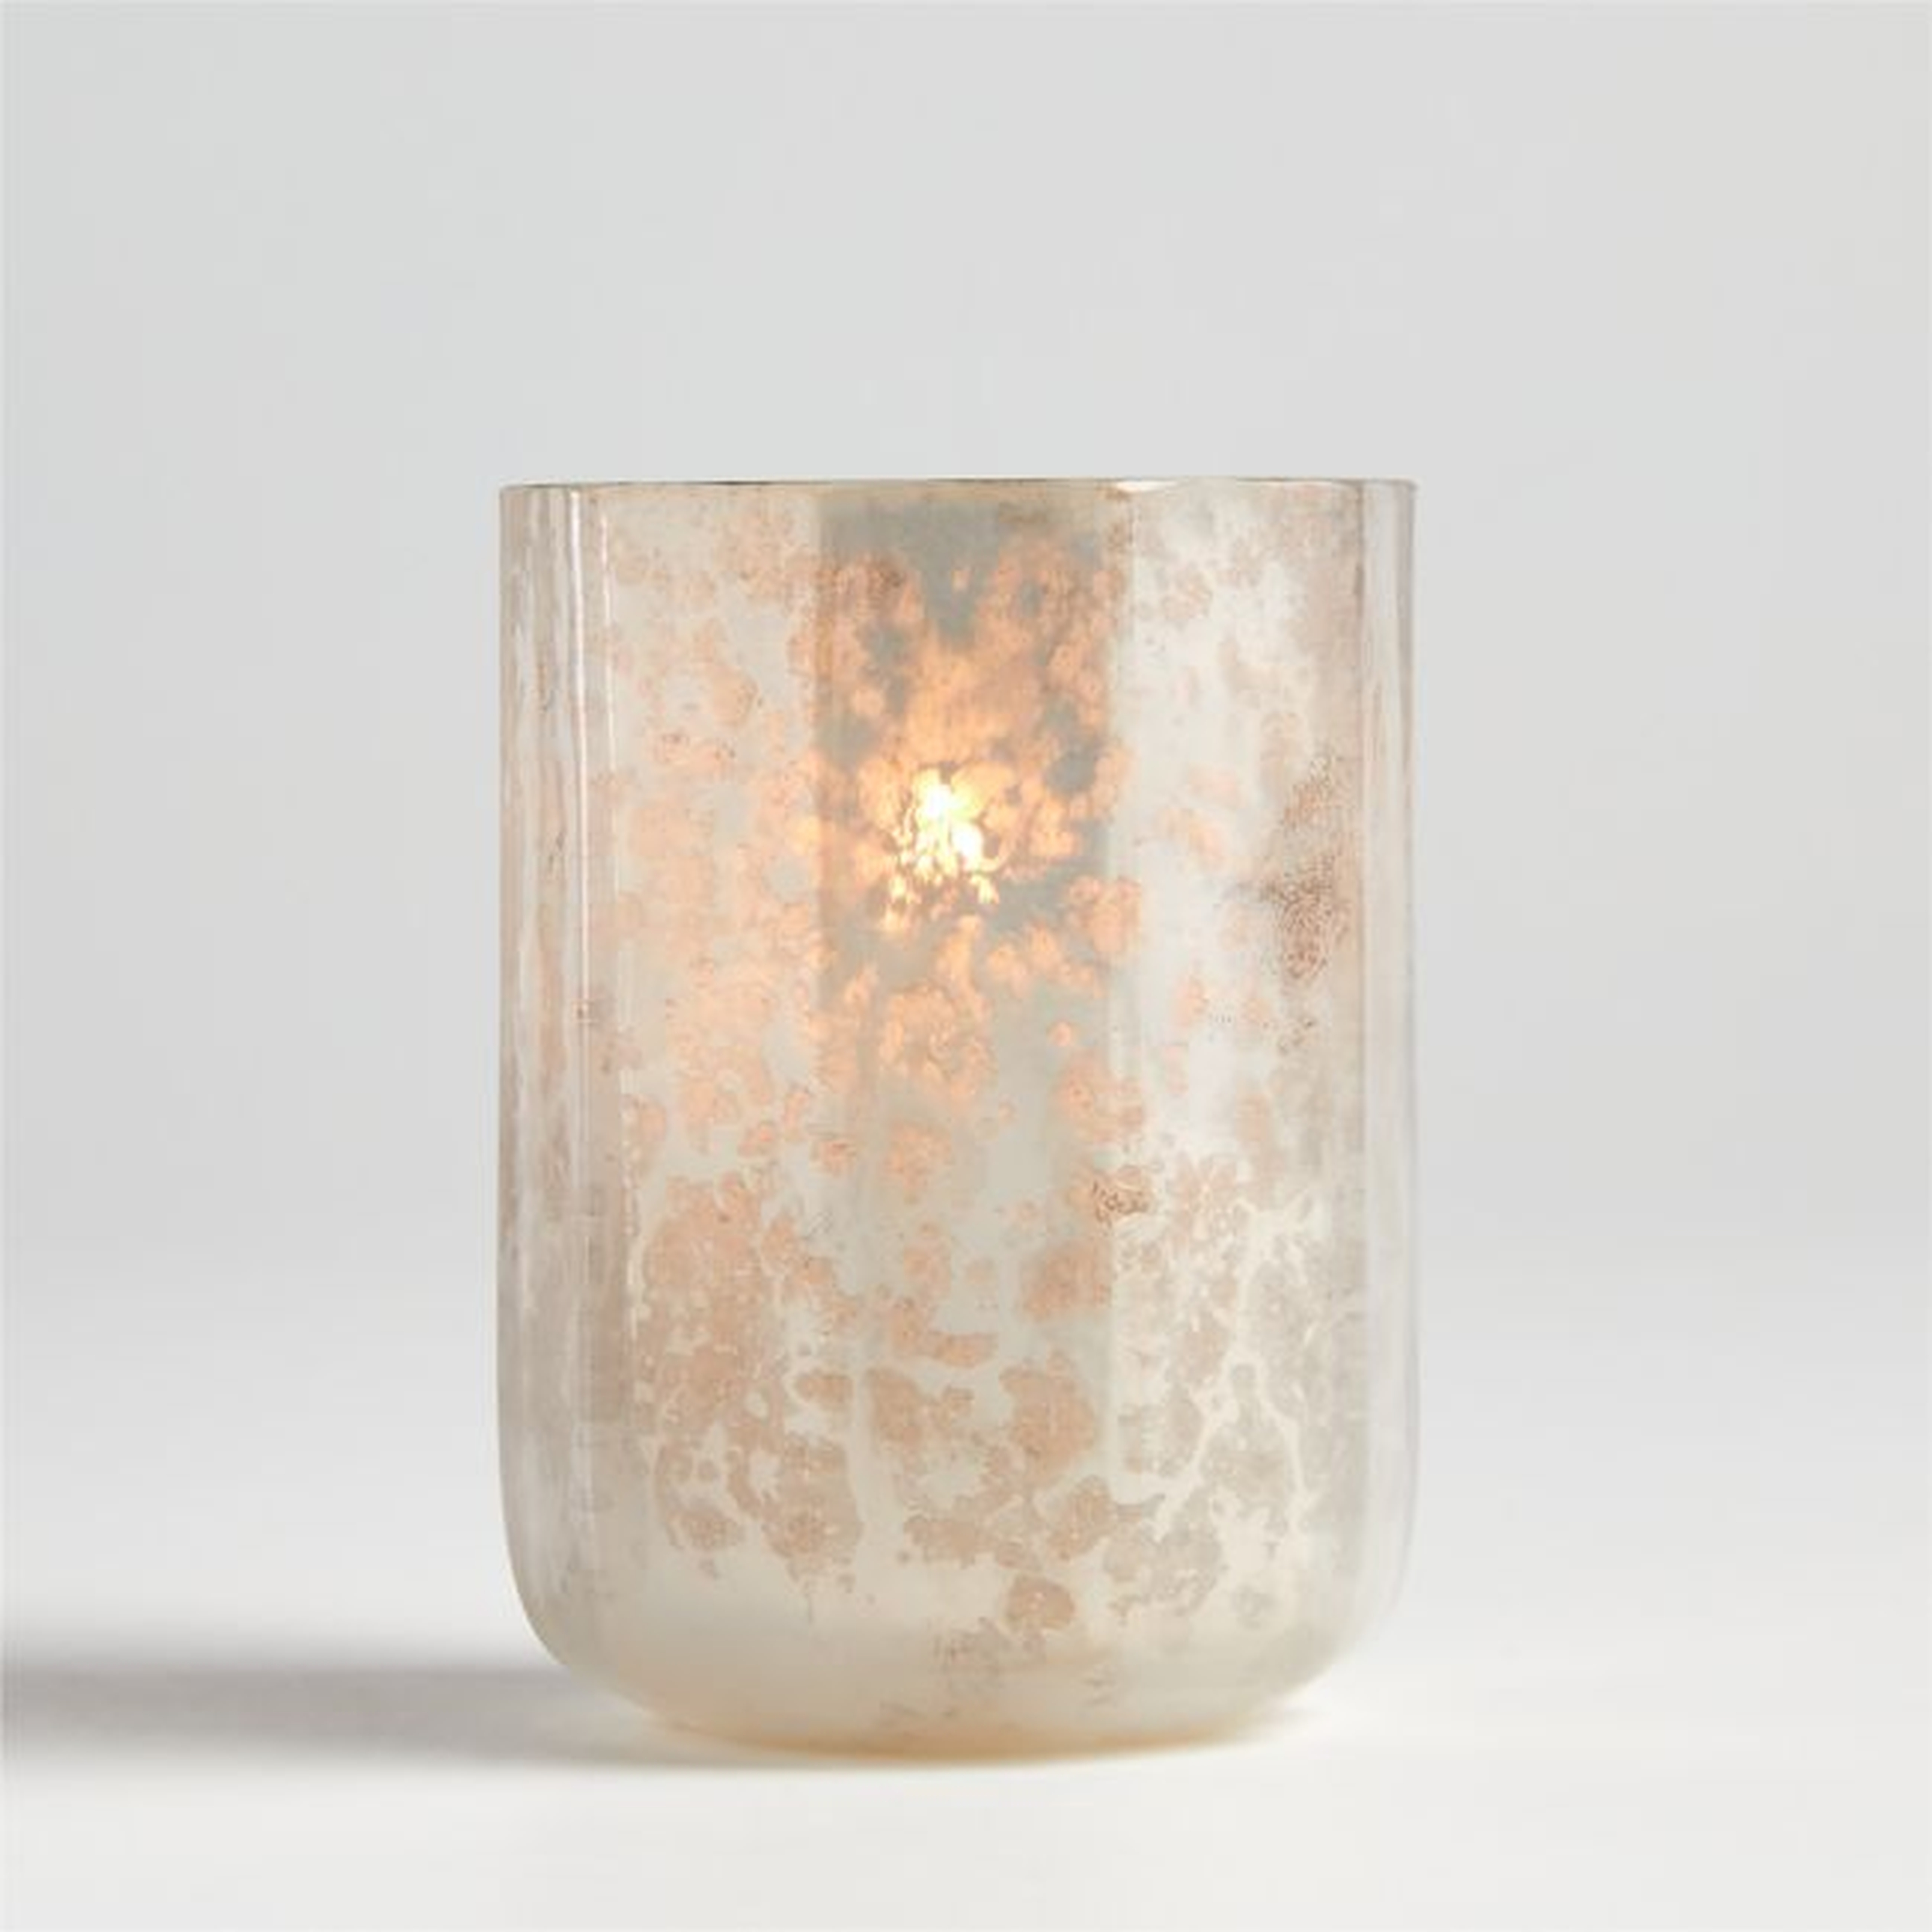 Cumulus White Mercury Glass Tealight Candle Holder - Crate and Barrel